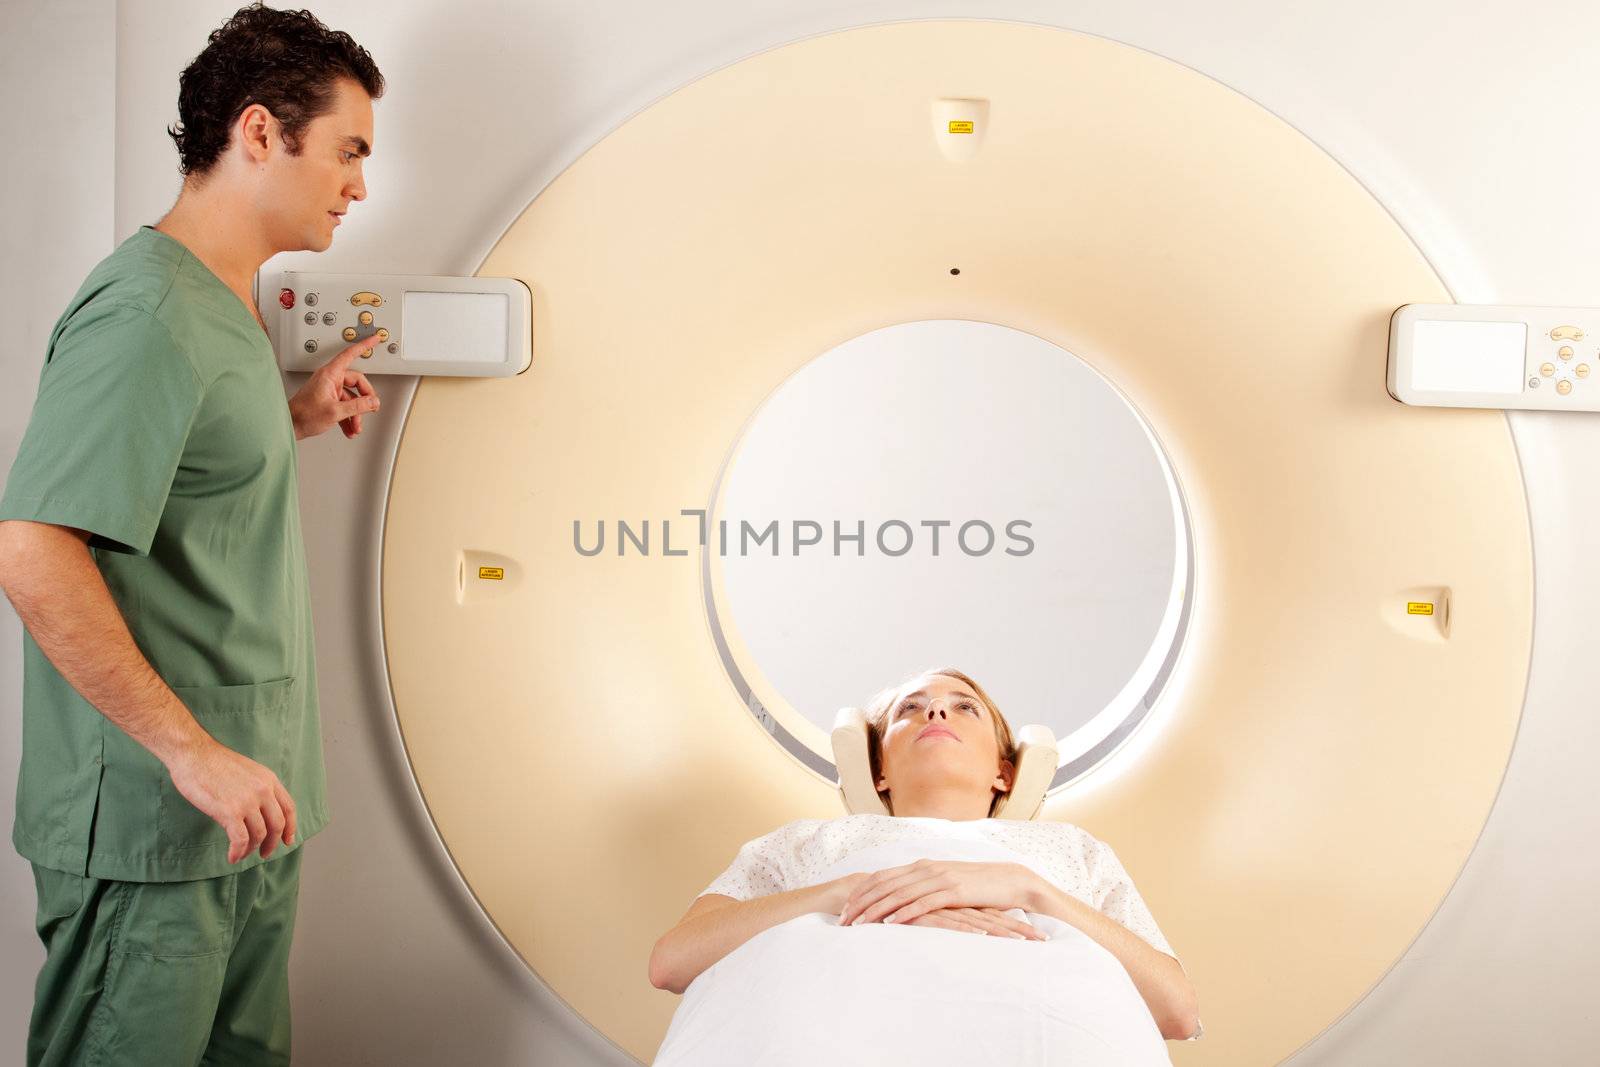 A CT Scanner Technician preparing a patient for scanning